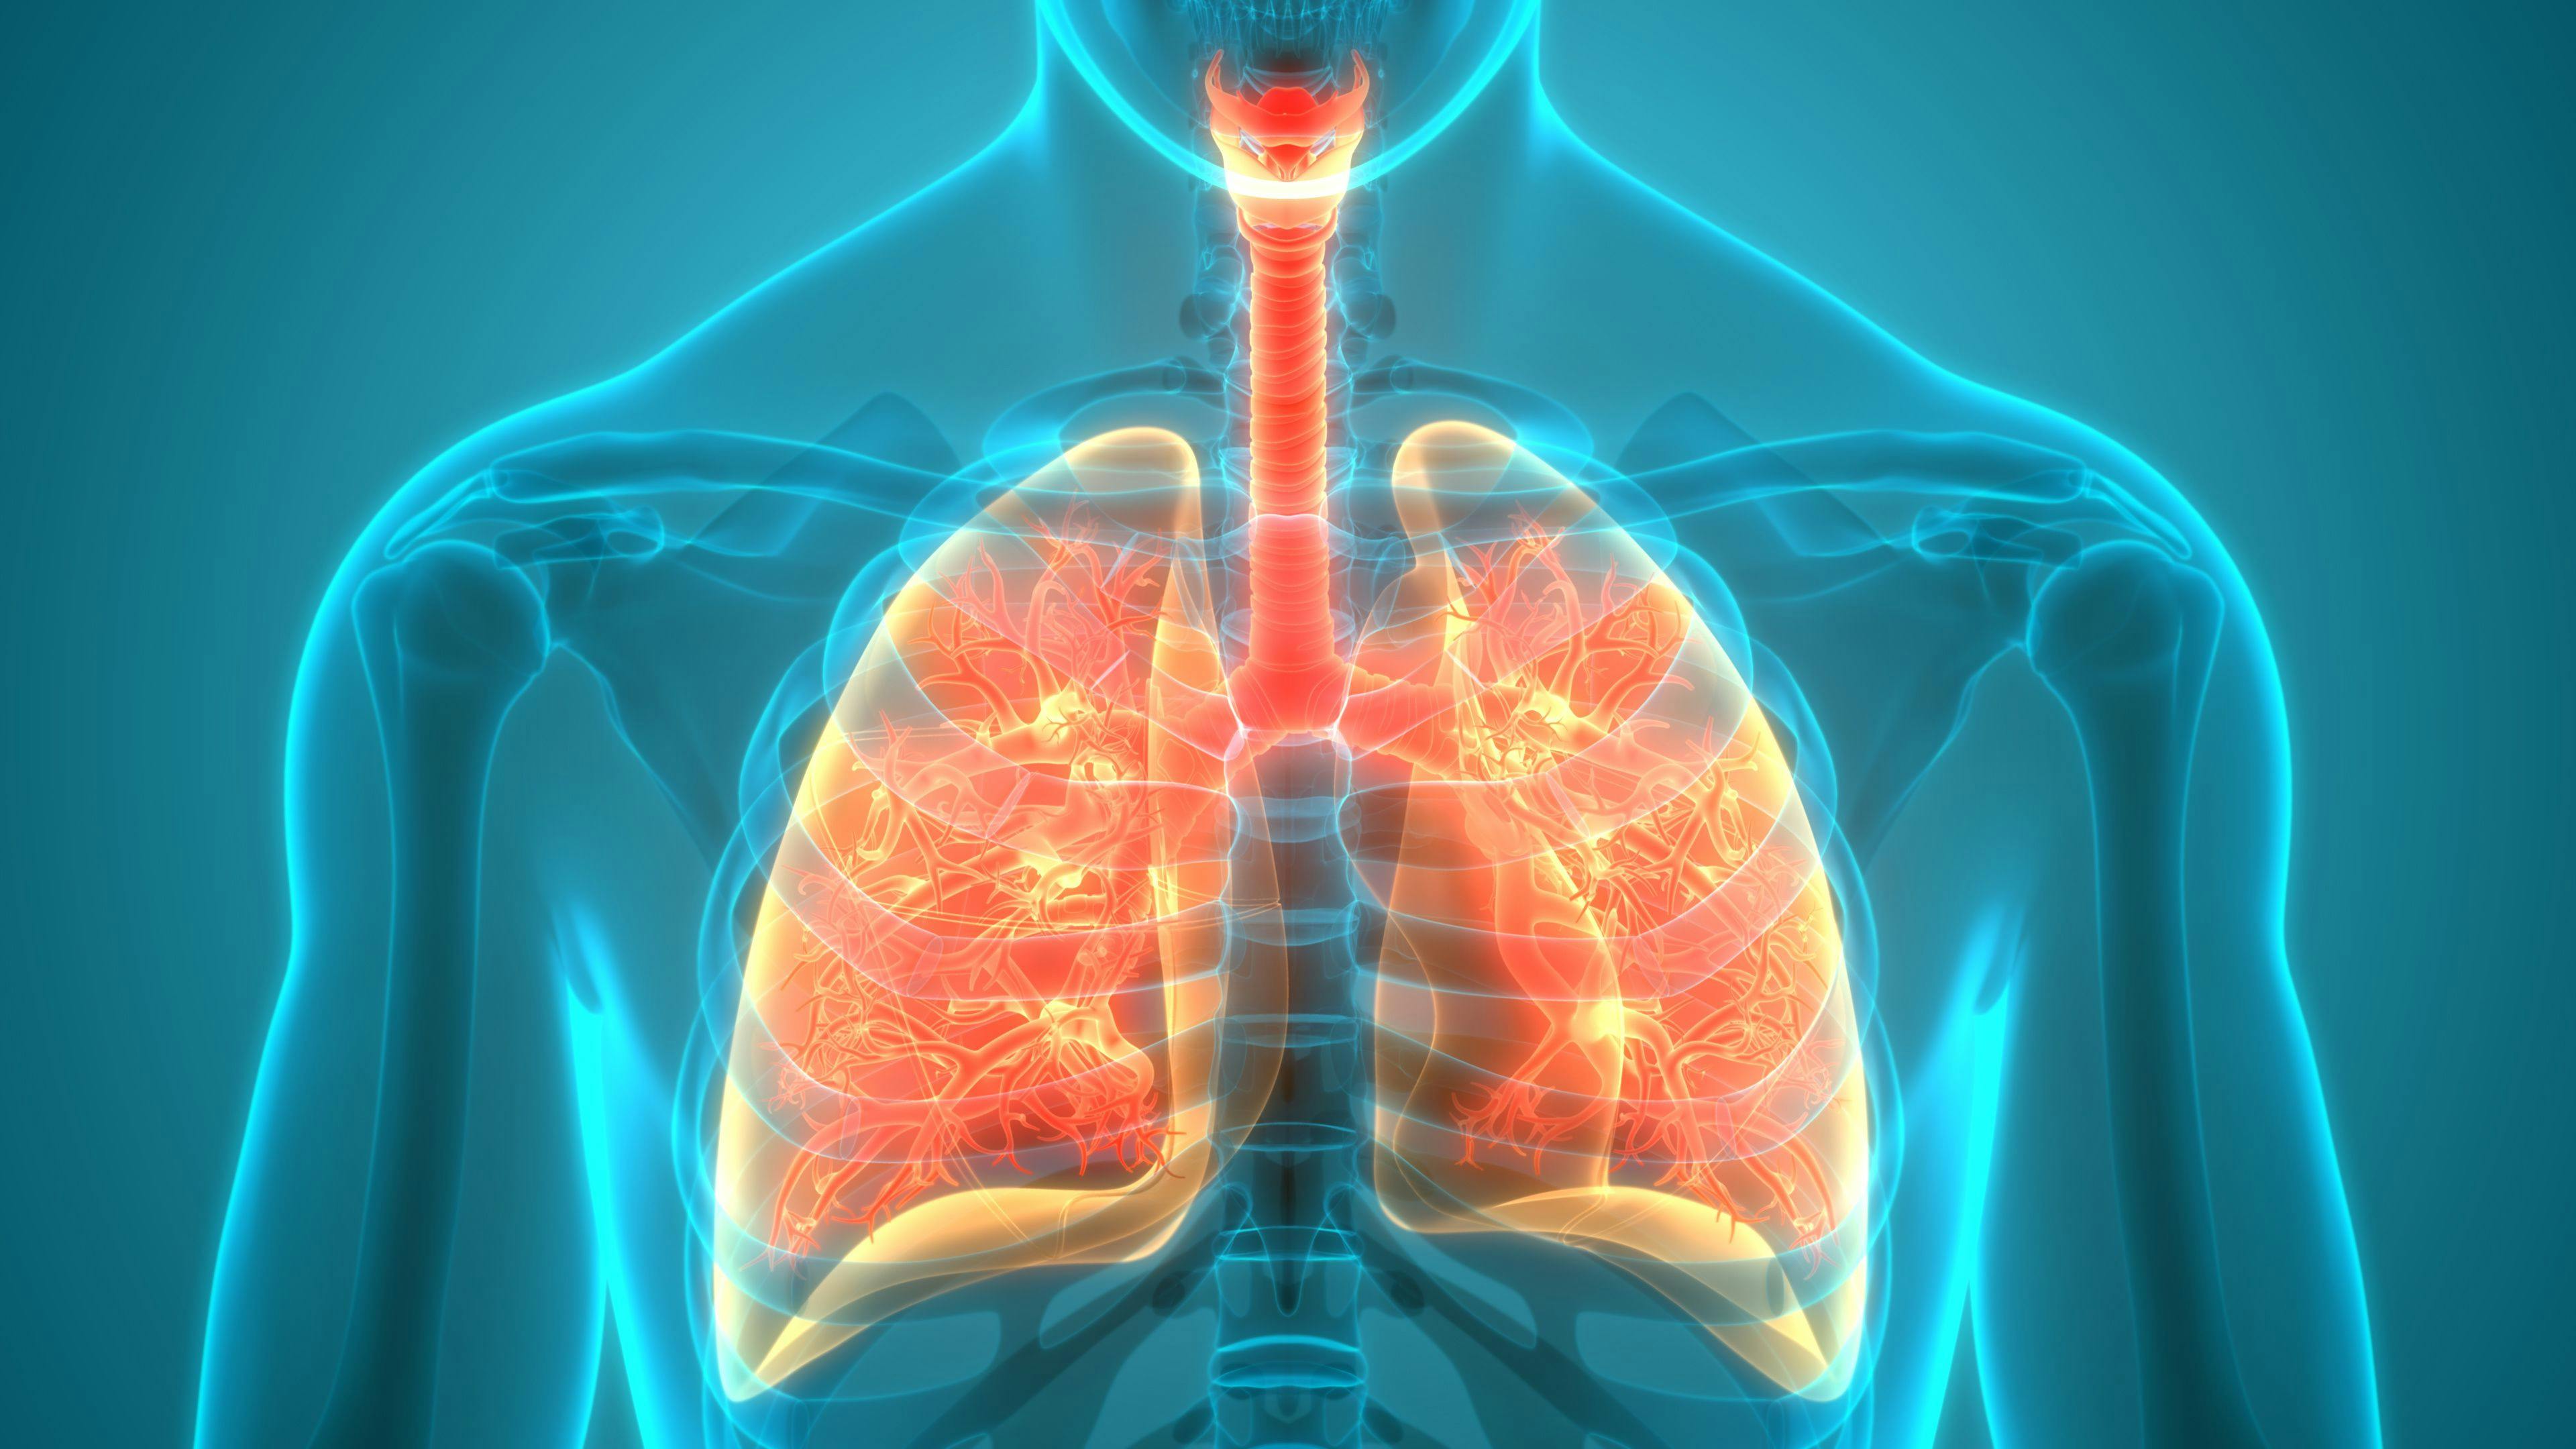 Data indicate that atezolizumab may achieve overall survival benefit compared with best supportive care in resected non–small cell lung cancer.